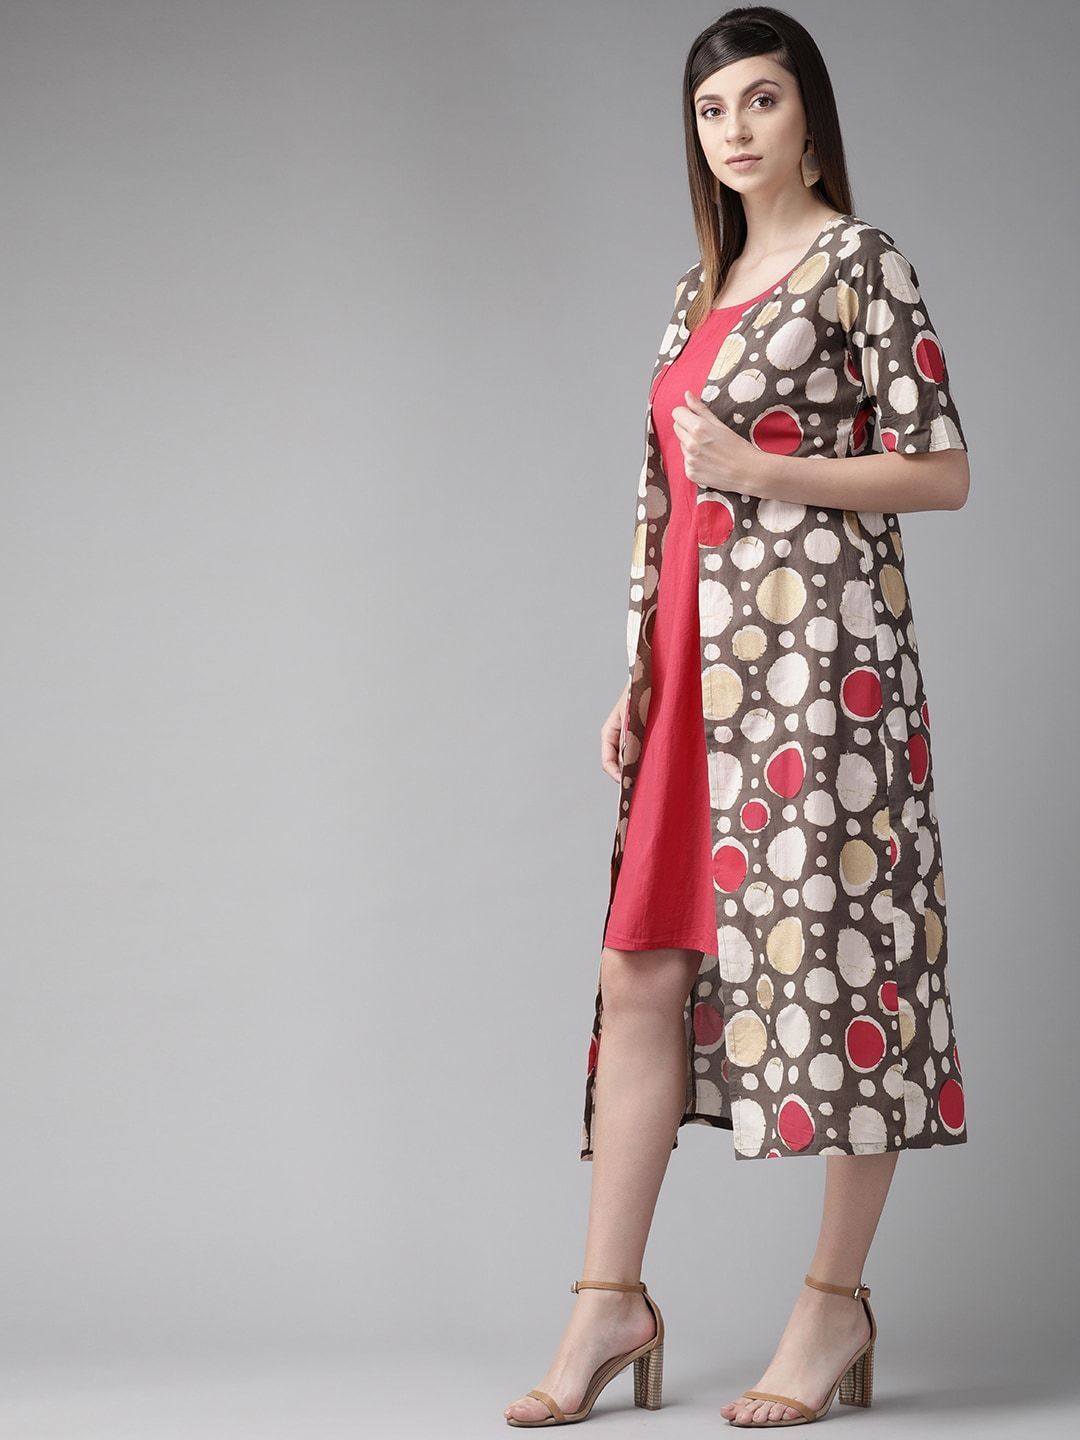 Women's  Red & Brown Printed Layered A-Line Dress - AKS